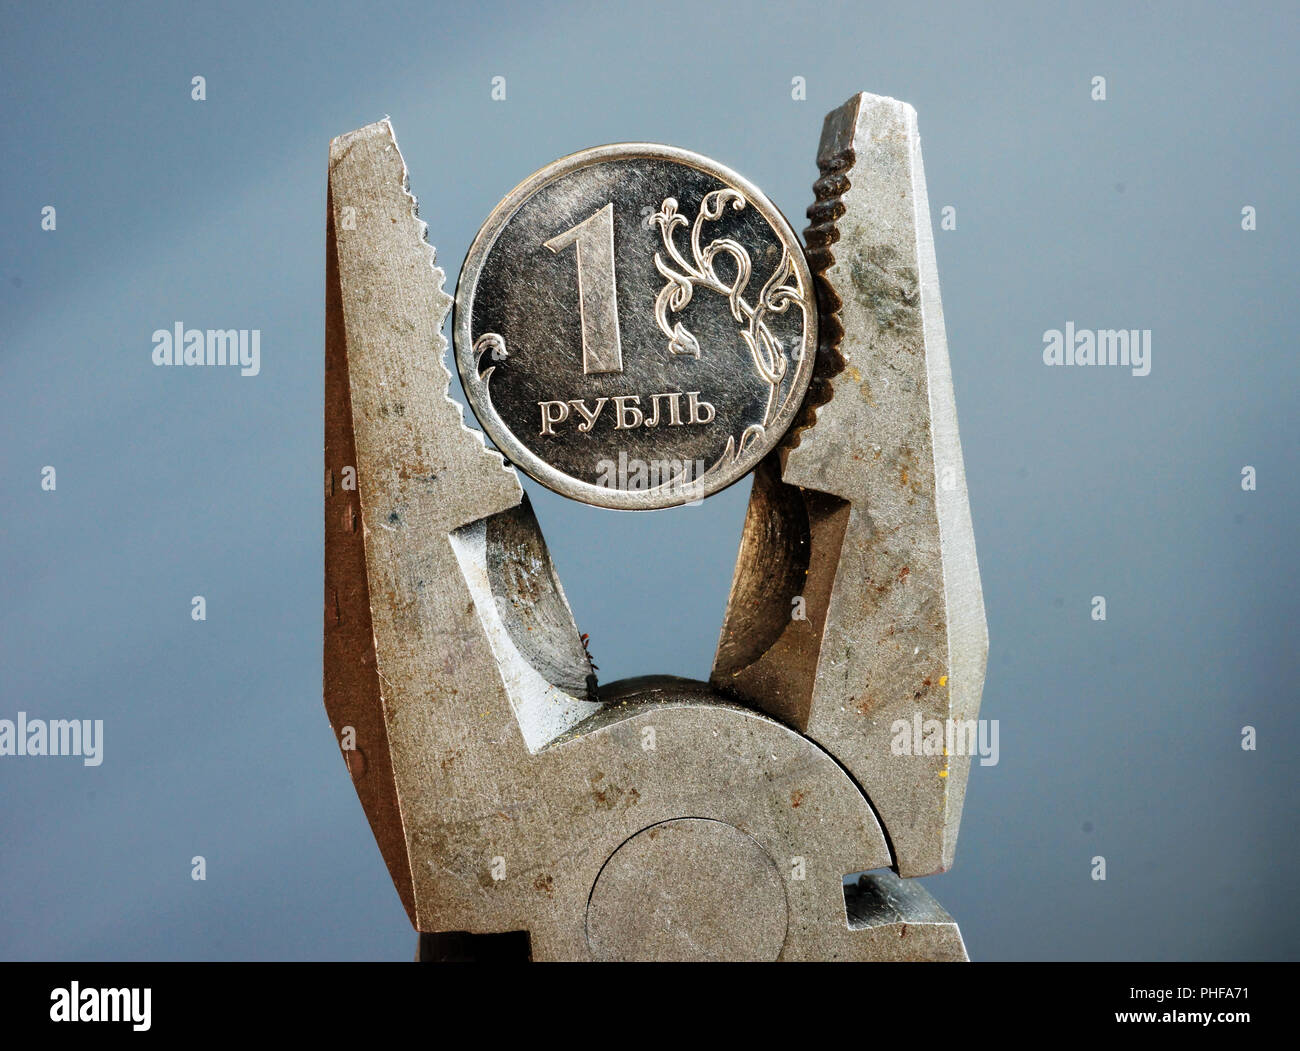 Pliers squeezed the Russian ruble. Economic sanction and stagnation. Stock Photo